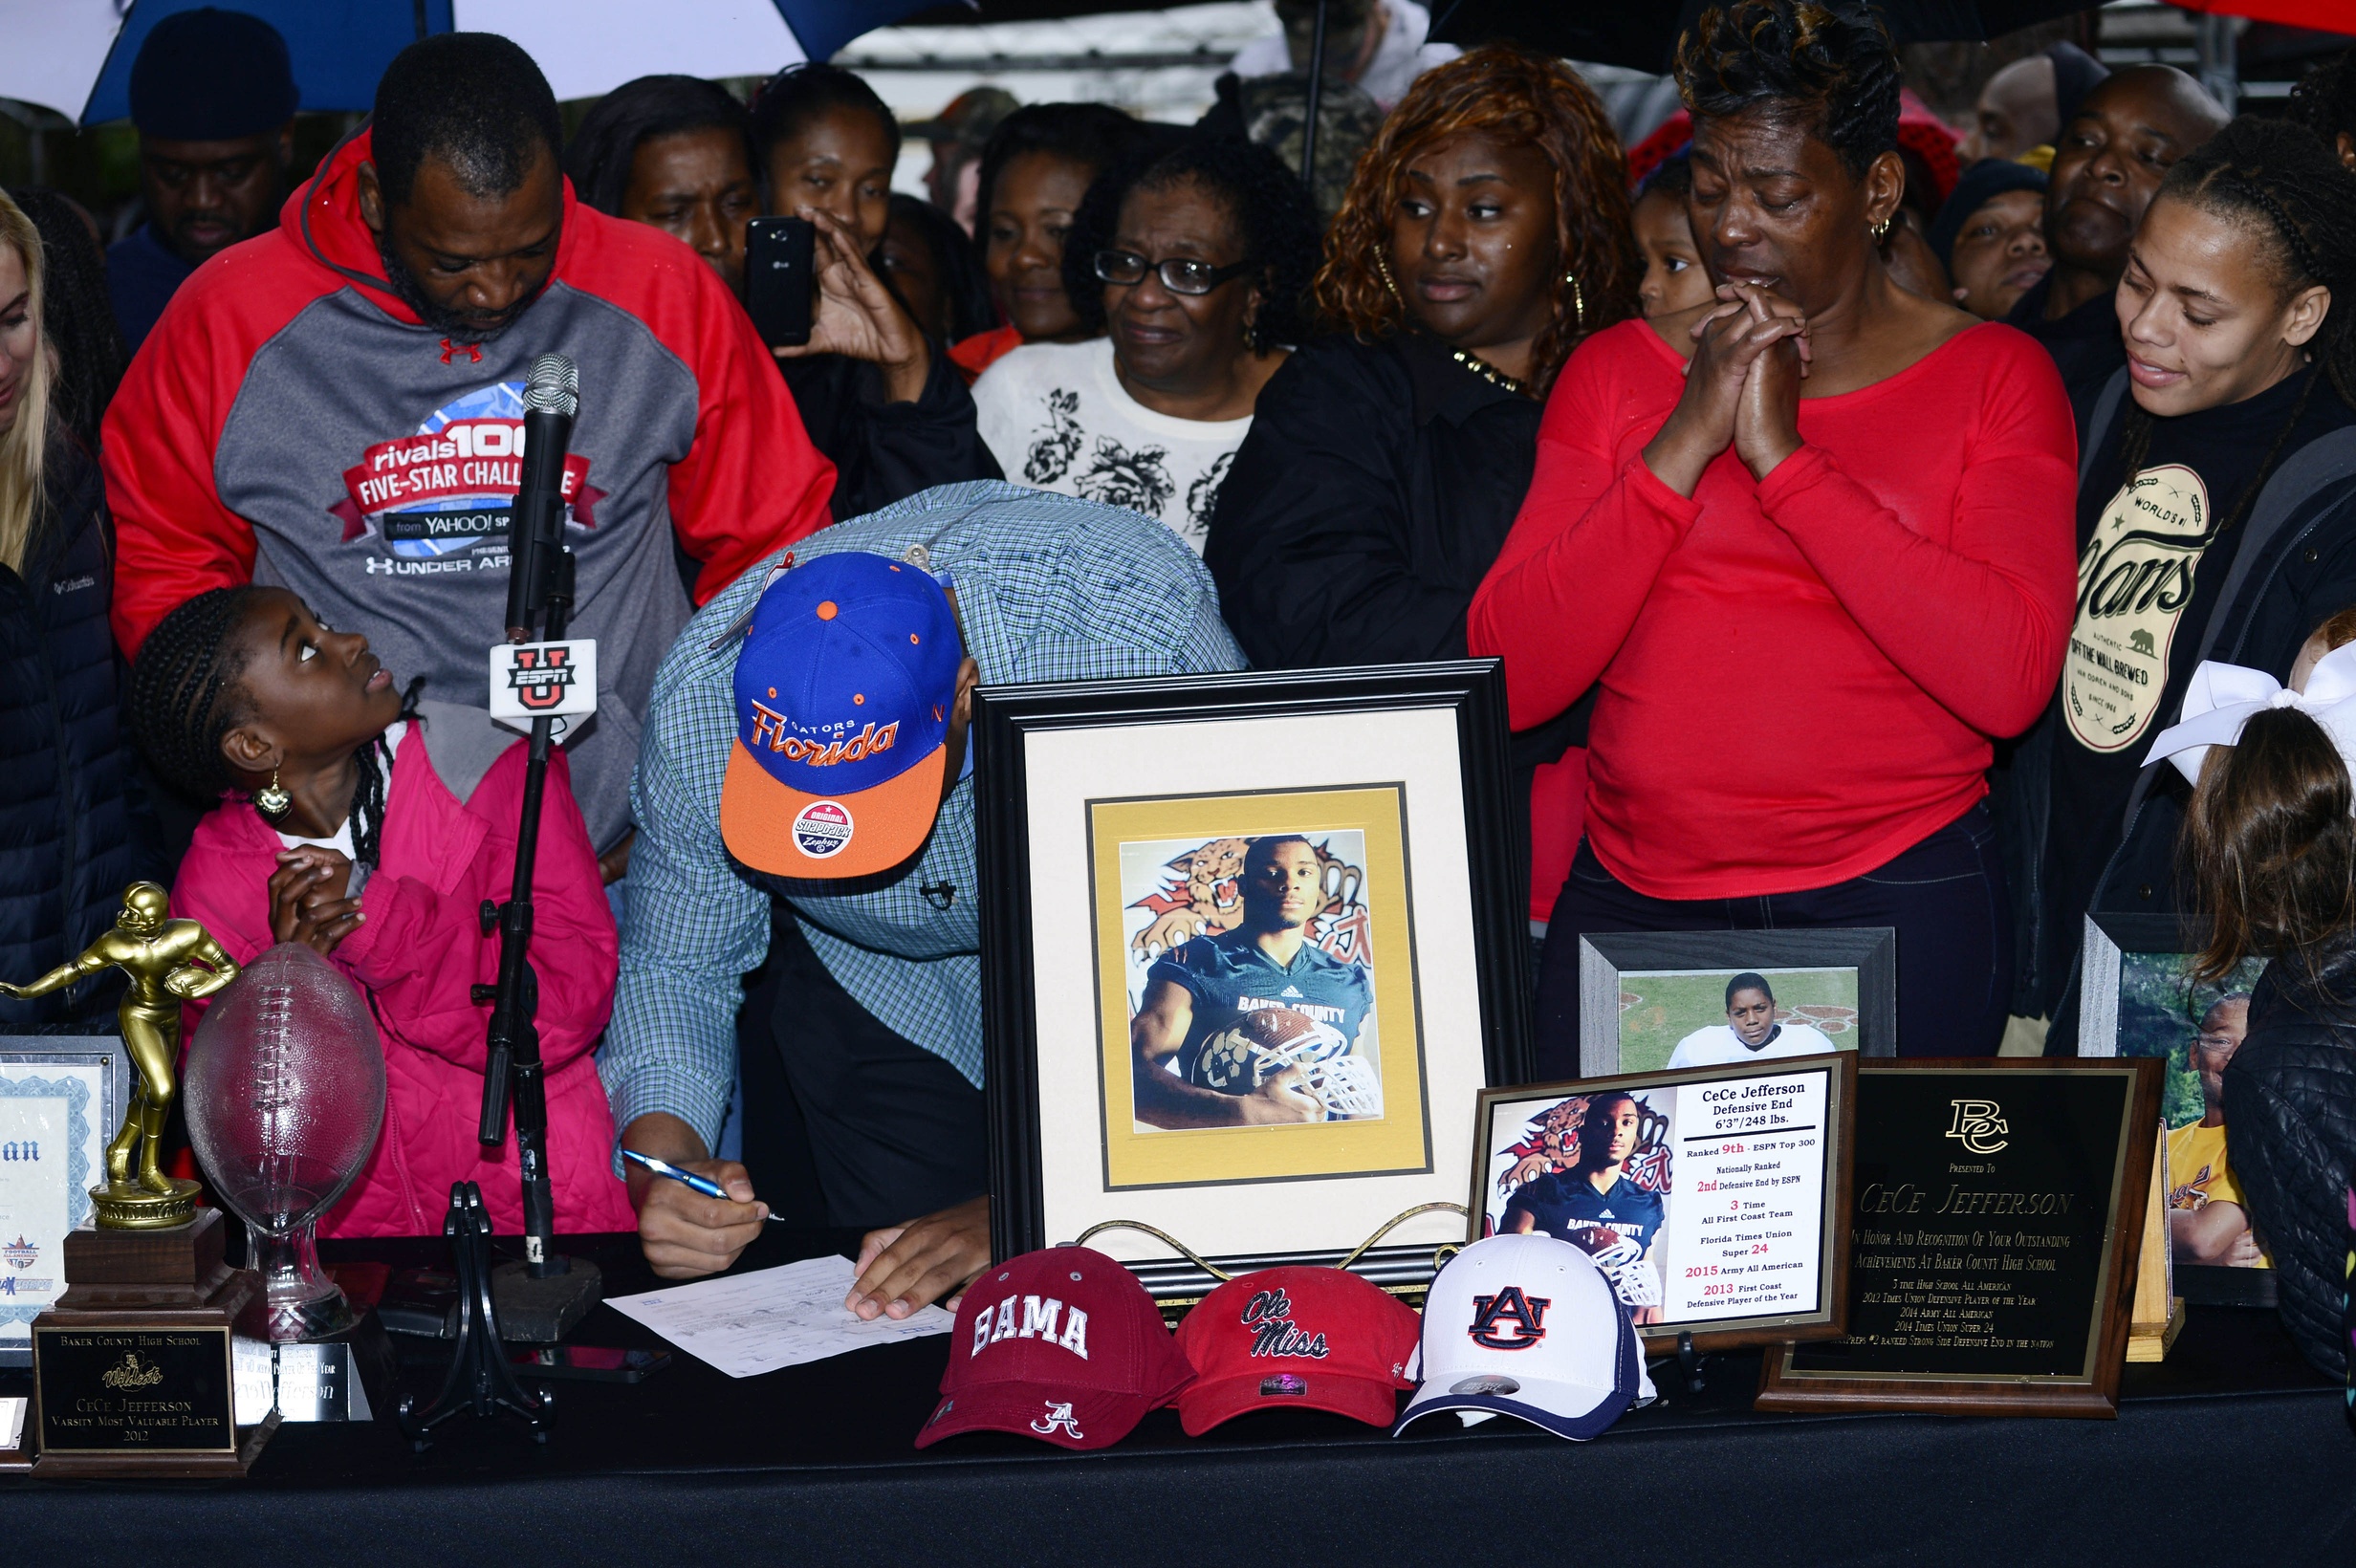 Feb 4, 2015; Glen Saint Mary, FL, USA; Ce Ce Jefferson signs with the University of Florida at his home near Baker County High School as his parents Leo and Annette Jefferson look on. Mandatory Credit: Richard Dole-USA TODAY Sports